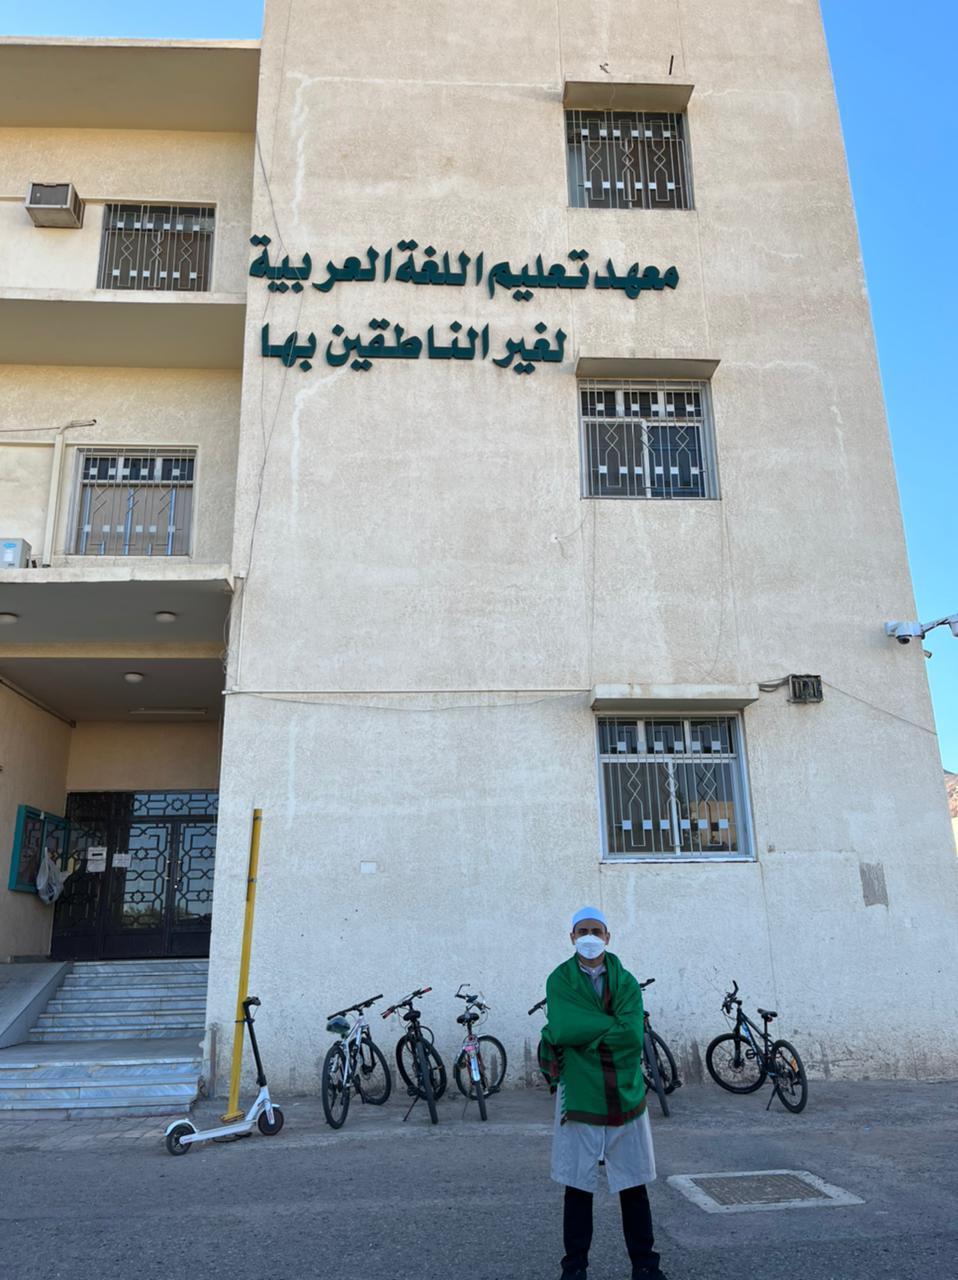 A person standing in front of a building with bicycles parked on the side

Description automatically generated with low confidence